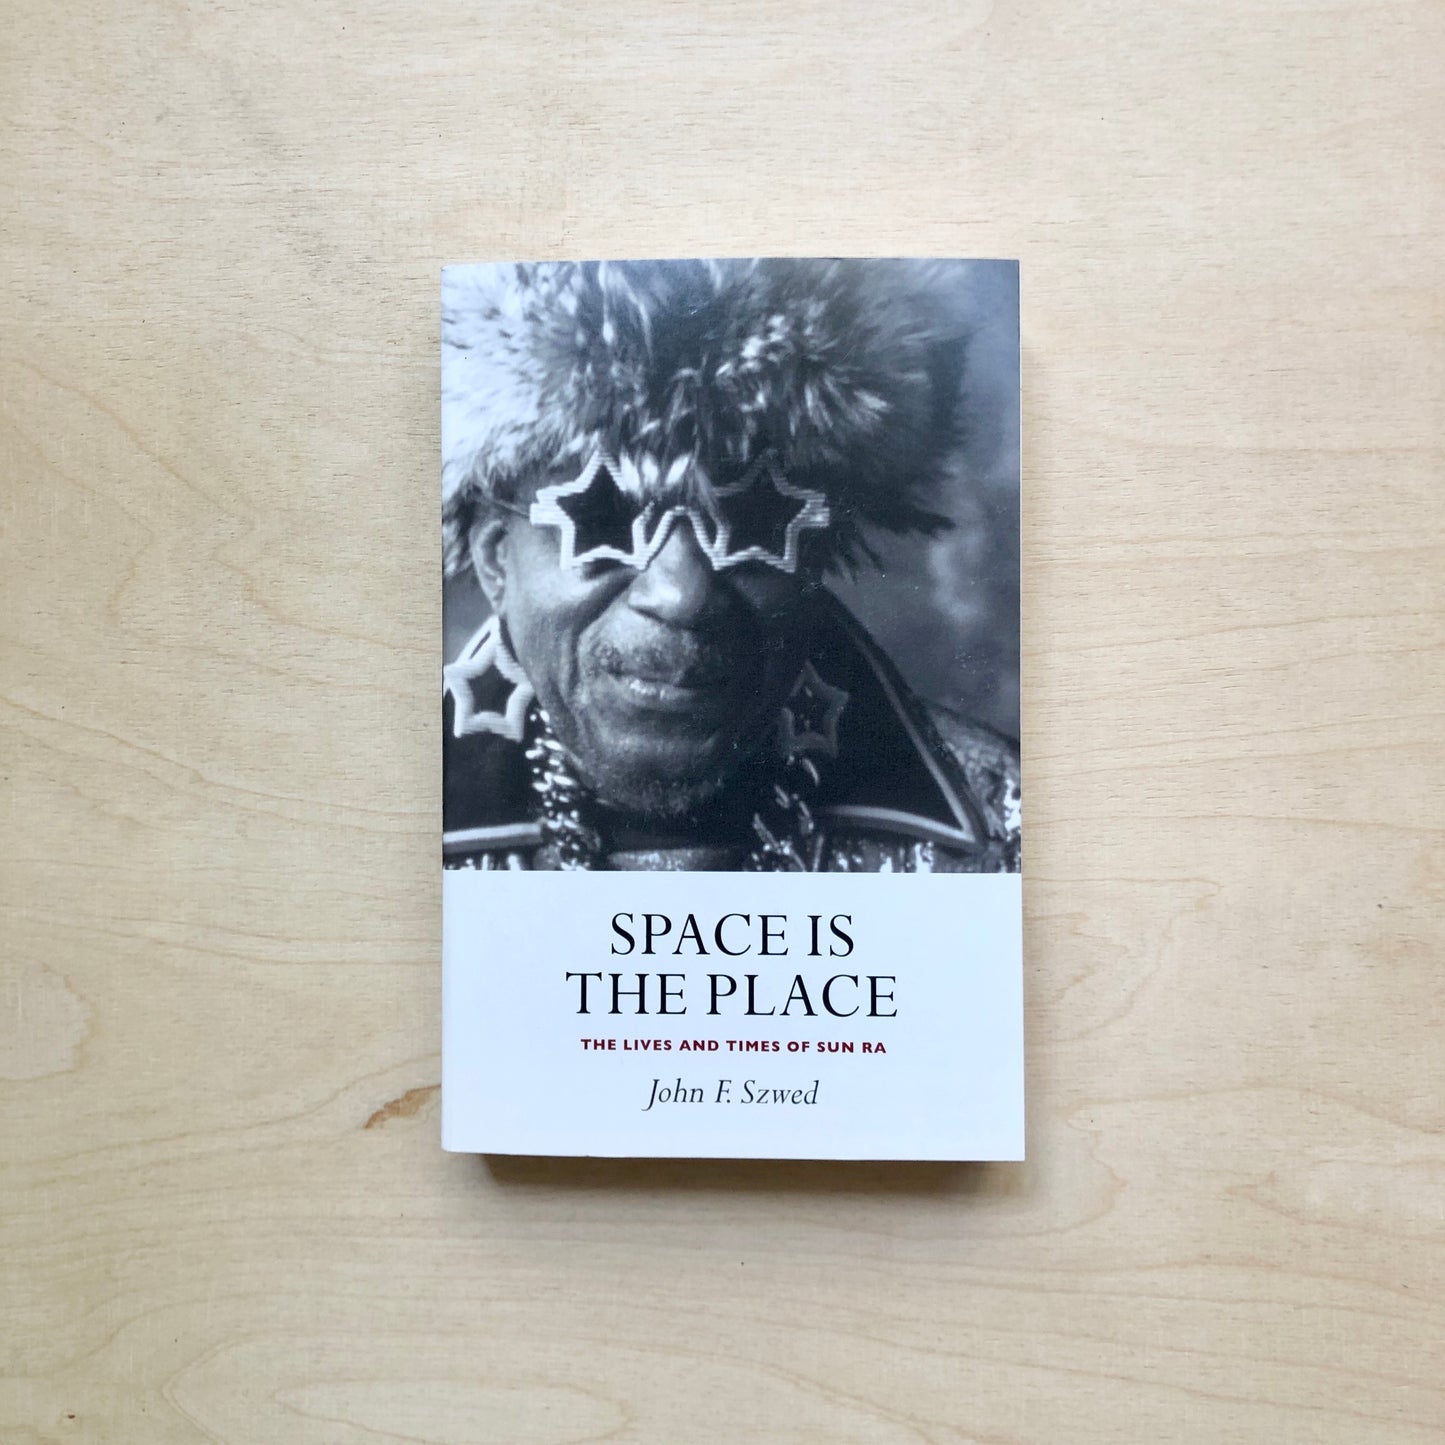 Space is the Place - The Lives and Times of Sun Ra